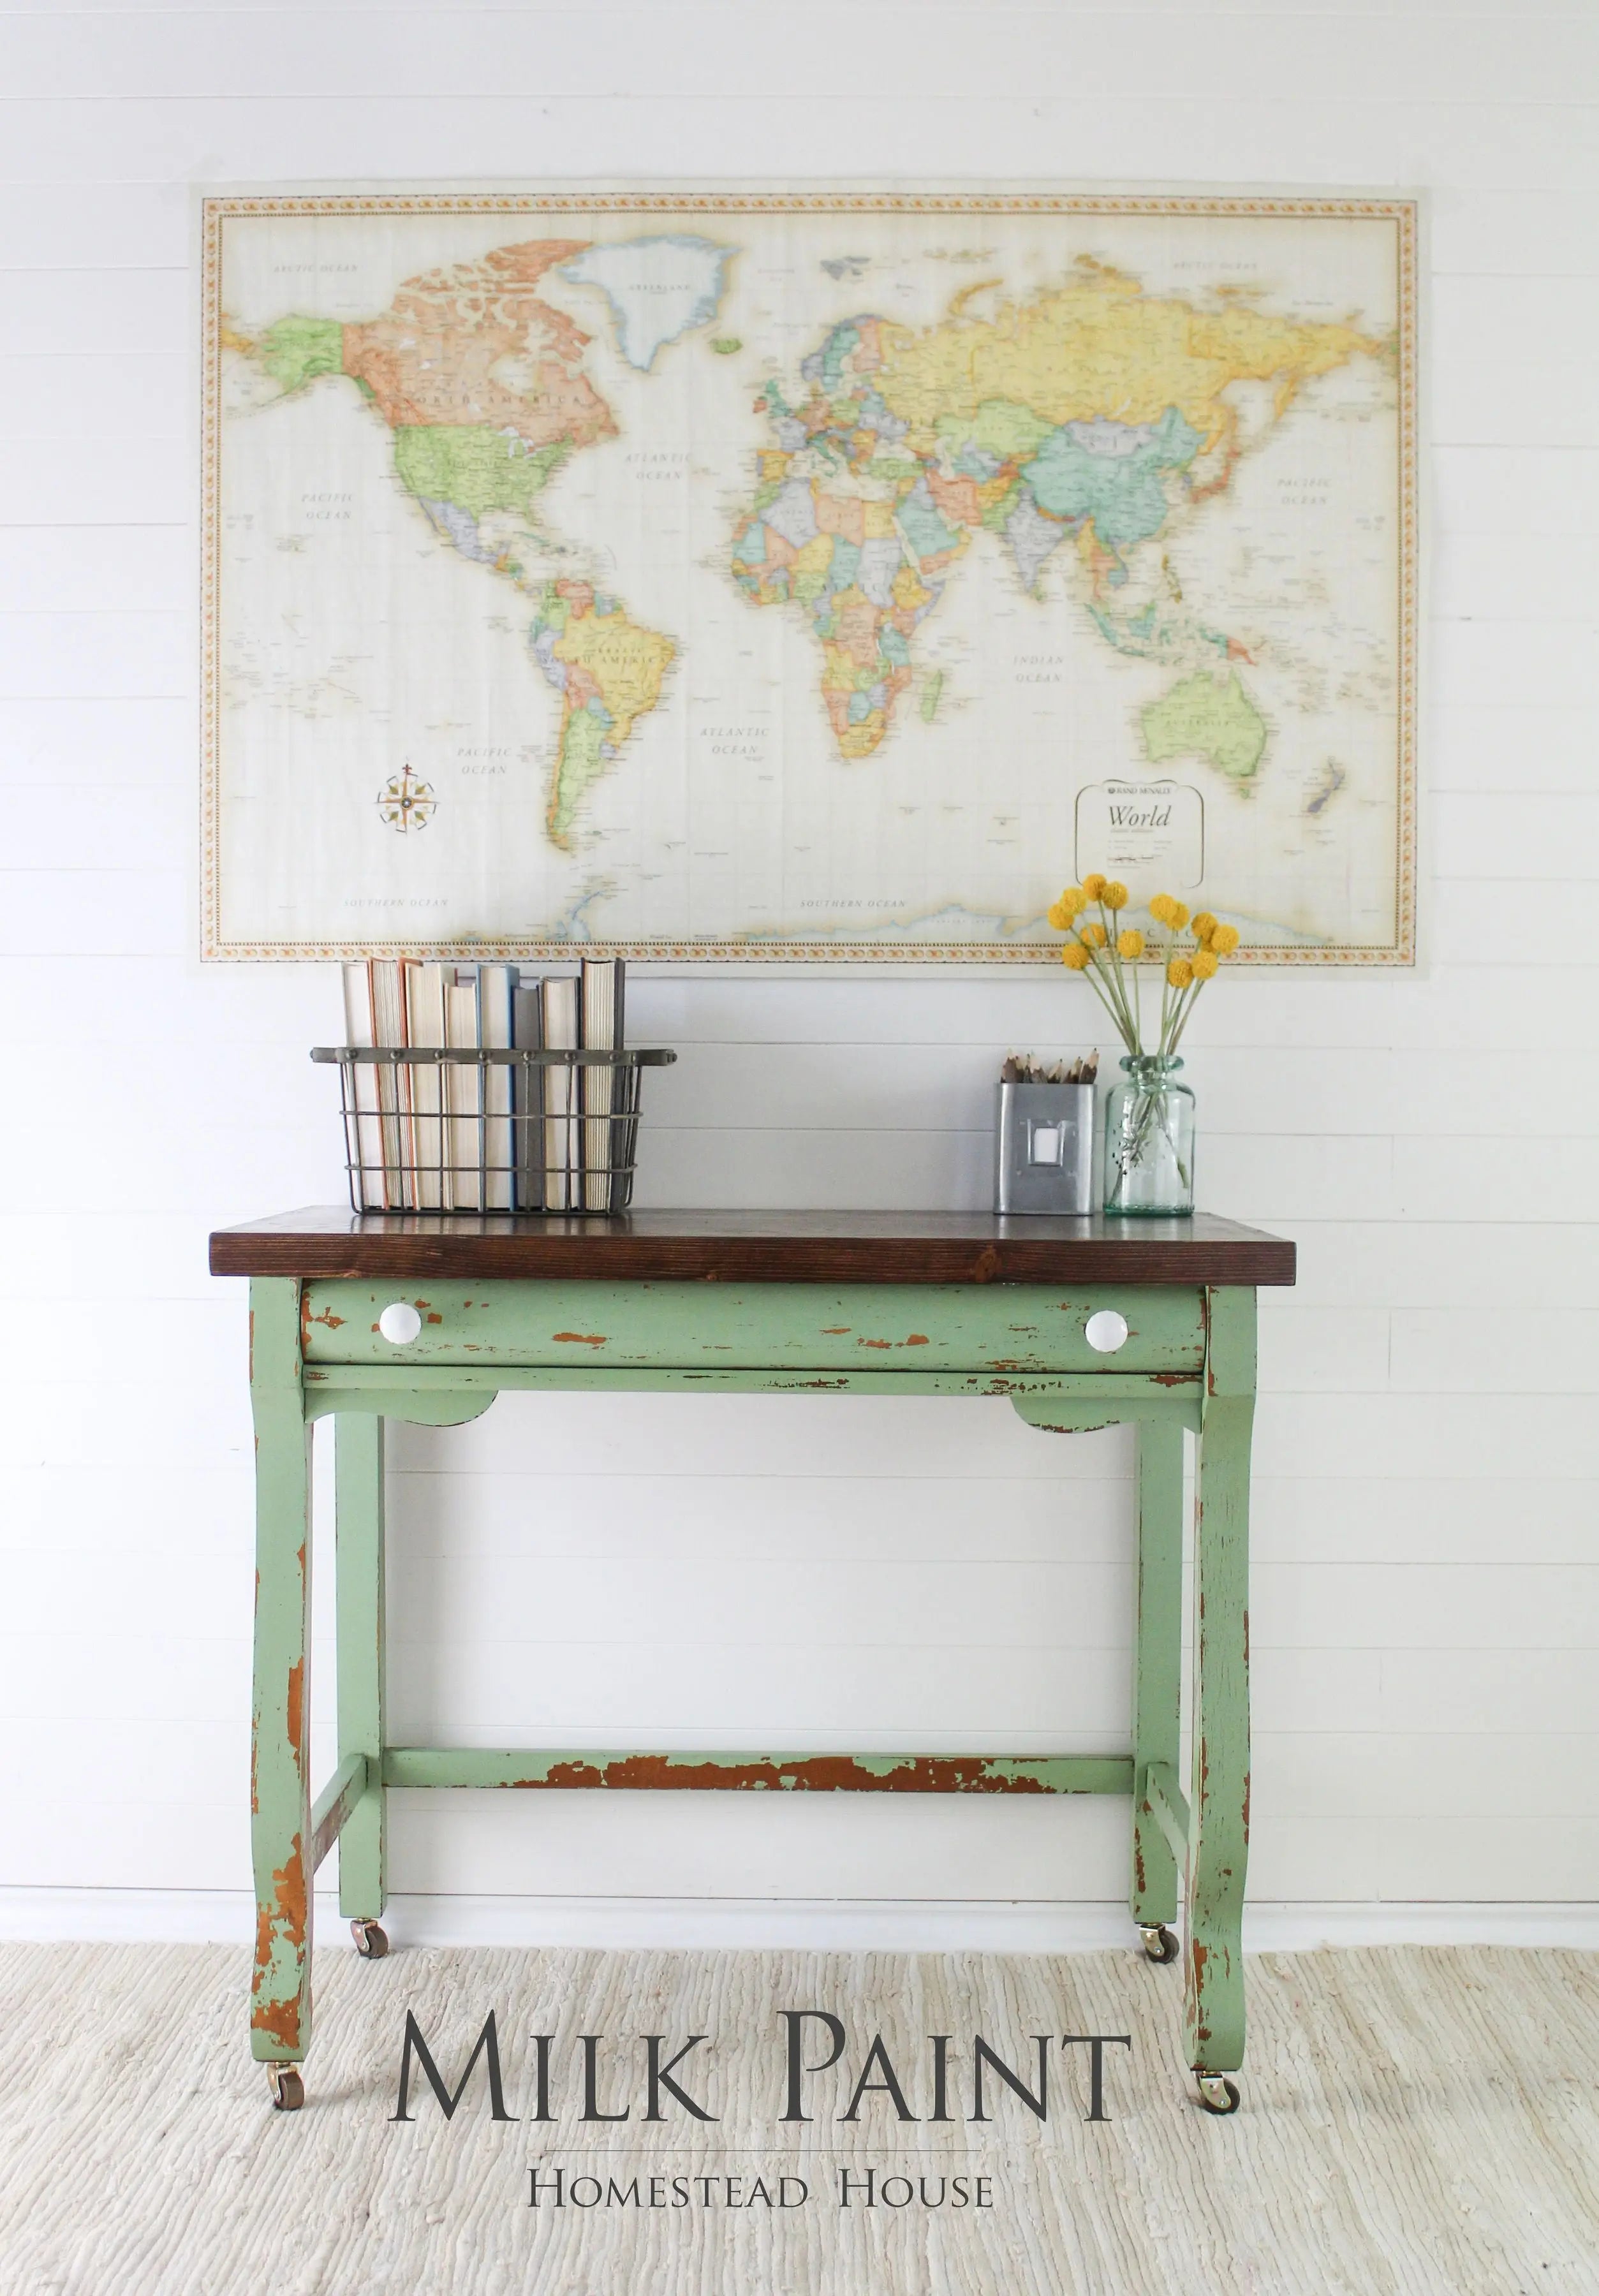 Homestead House Milk Paint - Upper Canada Green - Home Smith